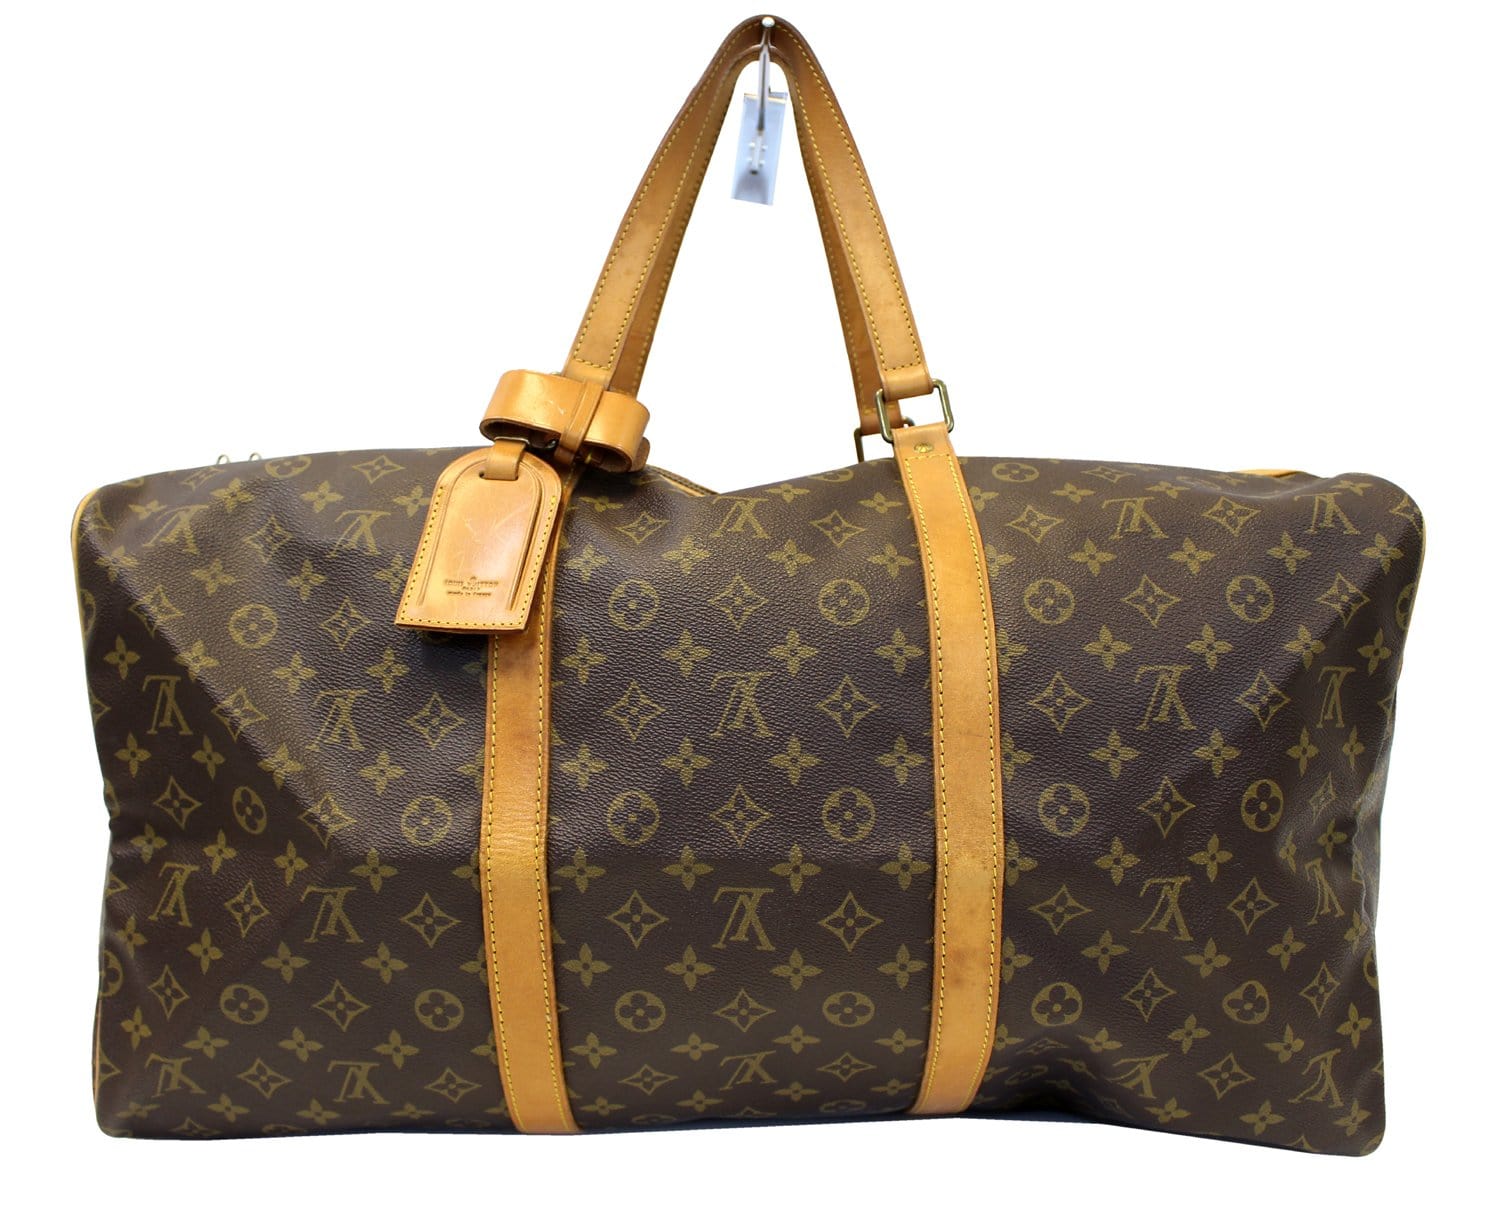 You can probably sell that Louis Vuitton bag for decent money in